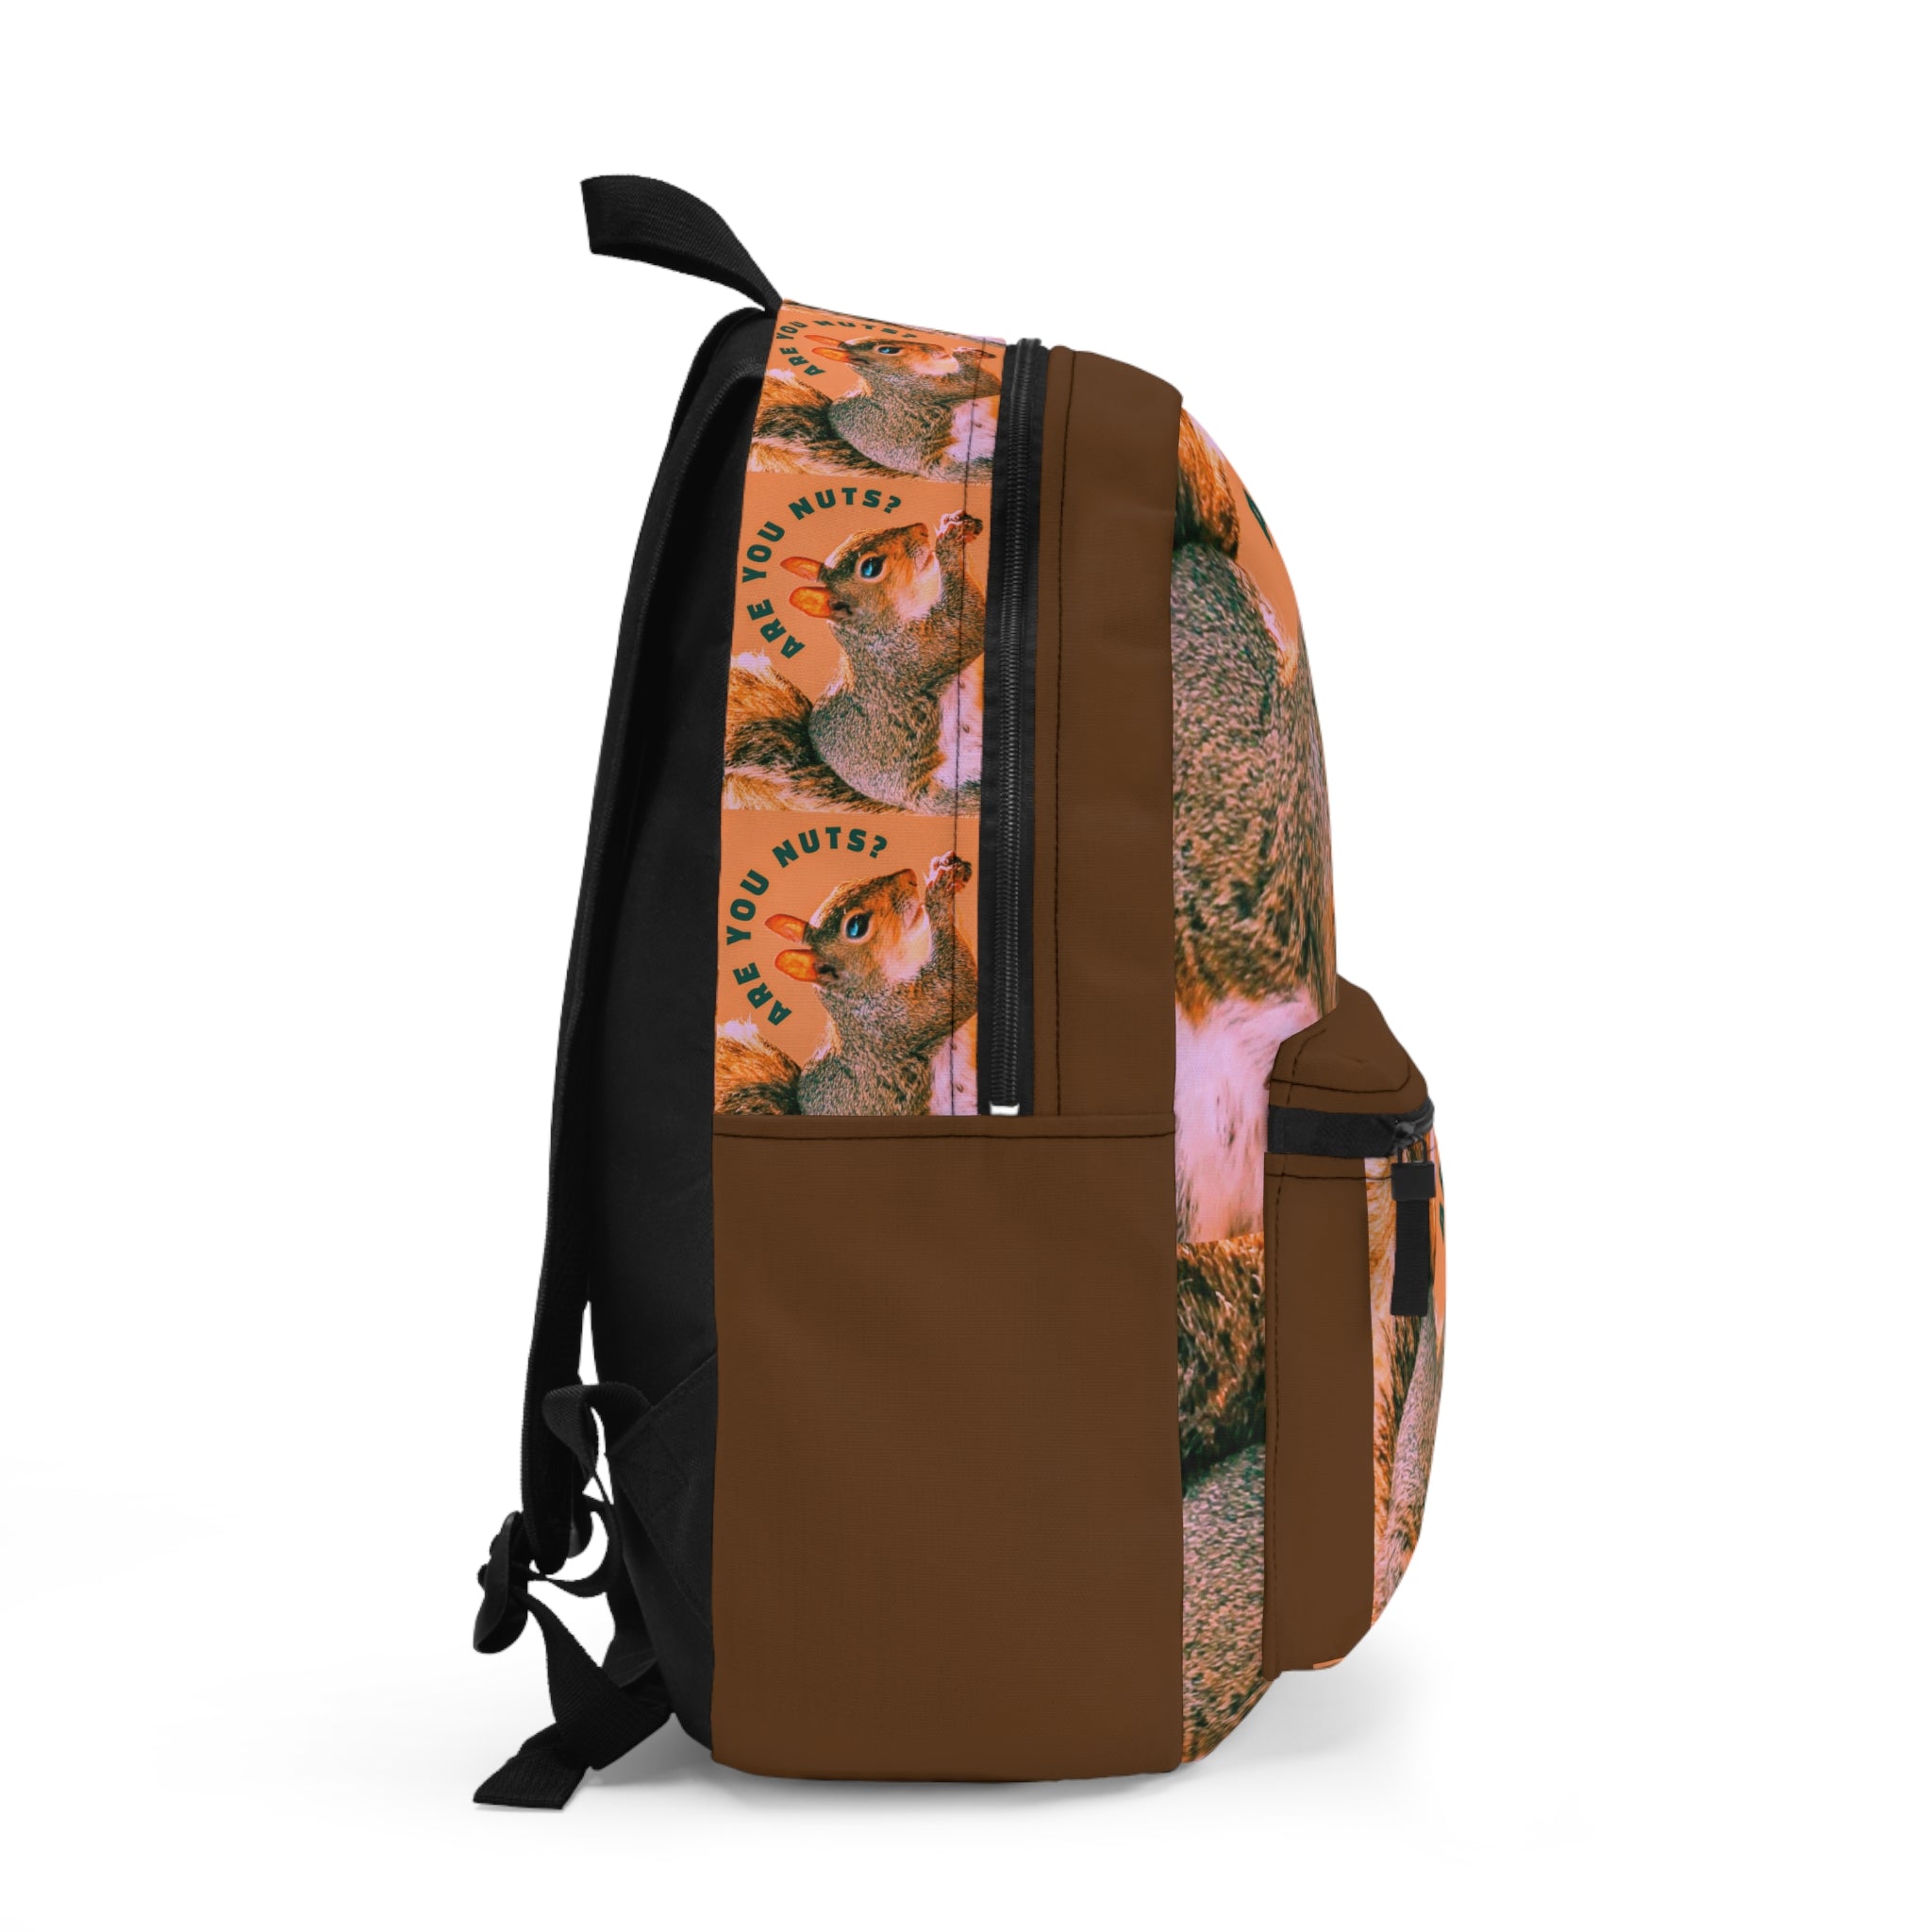 Are You Nuts? Funny Squirrel Backpack - Shell Design Boutique